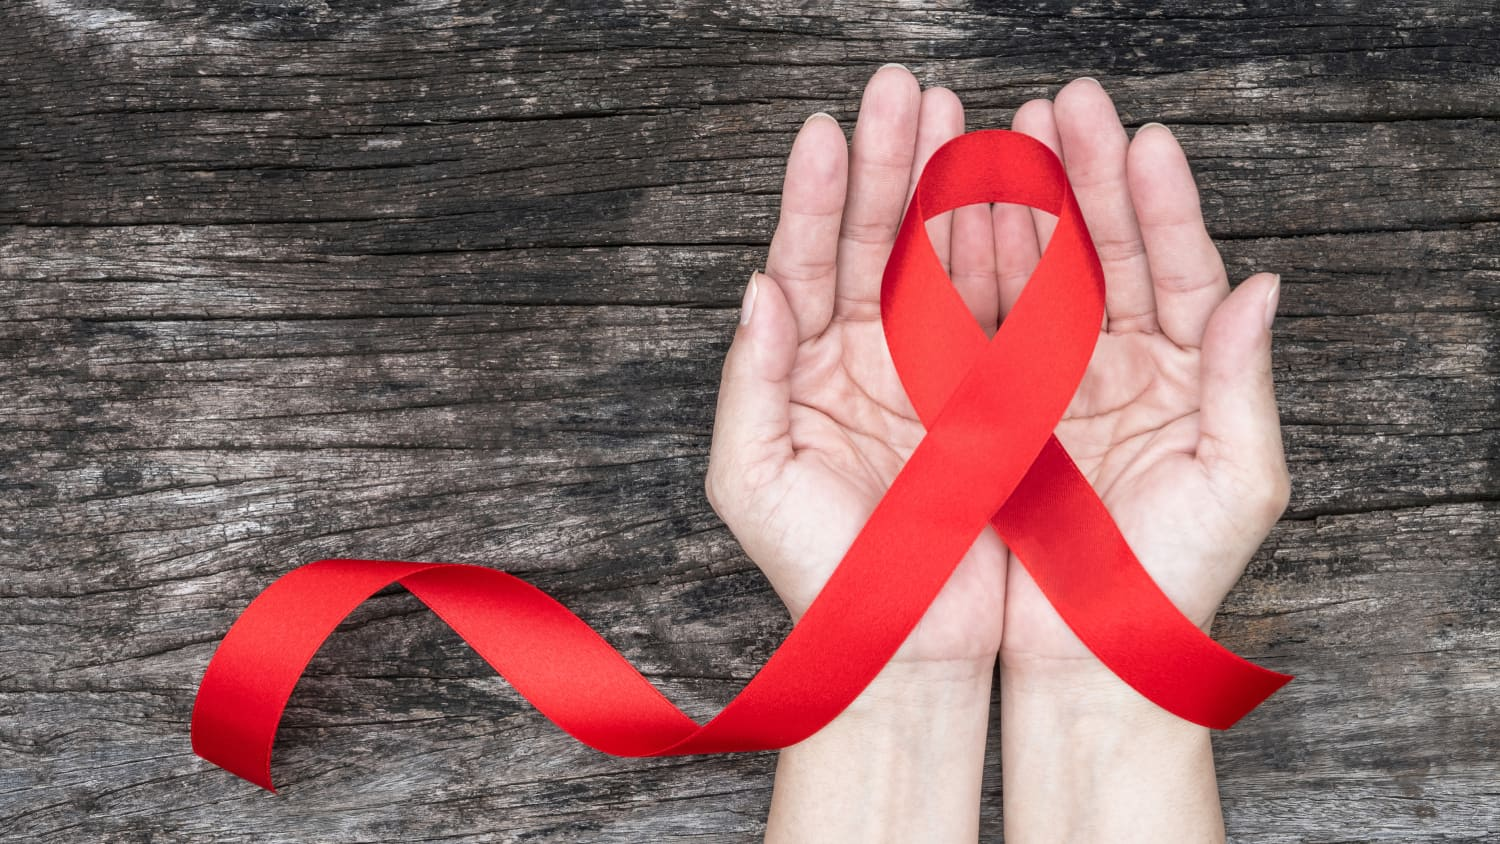 HIV Affected kerala Youth took wrong decision after breakup